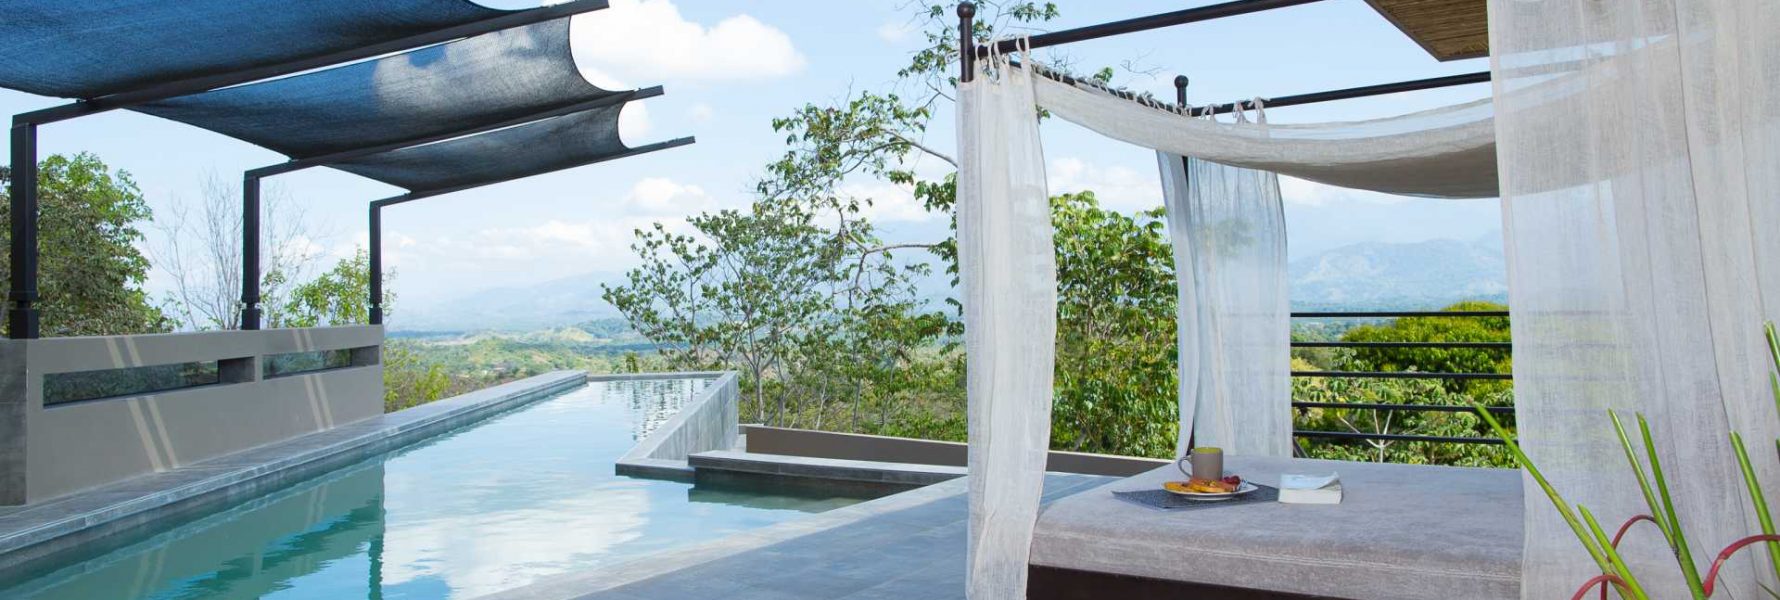 Enjoy using this gorgeous infinity pool looking out over the beautiful rainforest of Manuel Antonio.